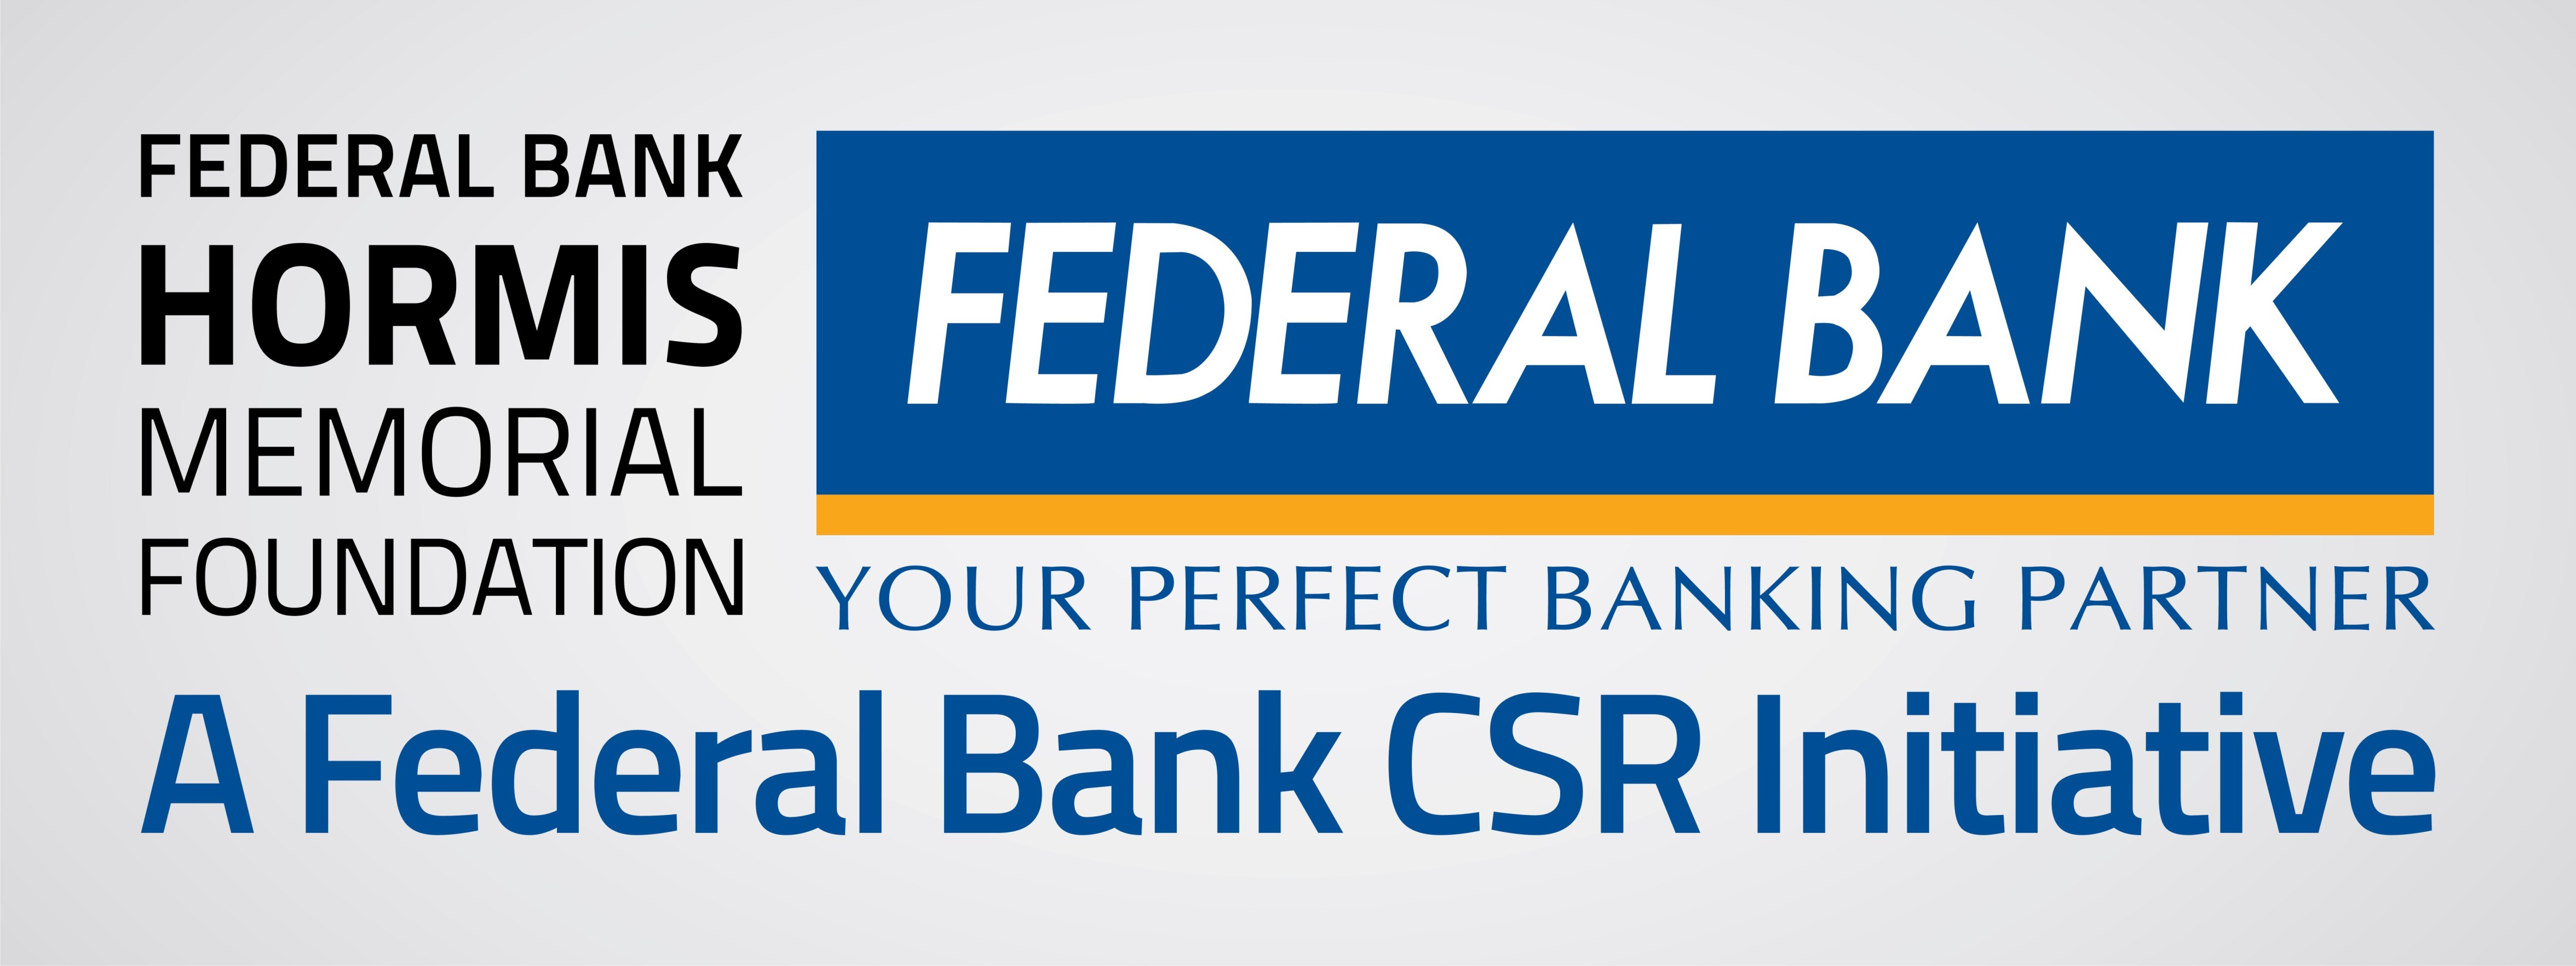 Federal Bank Announces Winners of Federal Bank Hormis Memorial Foundation Scholarships for 2022-23